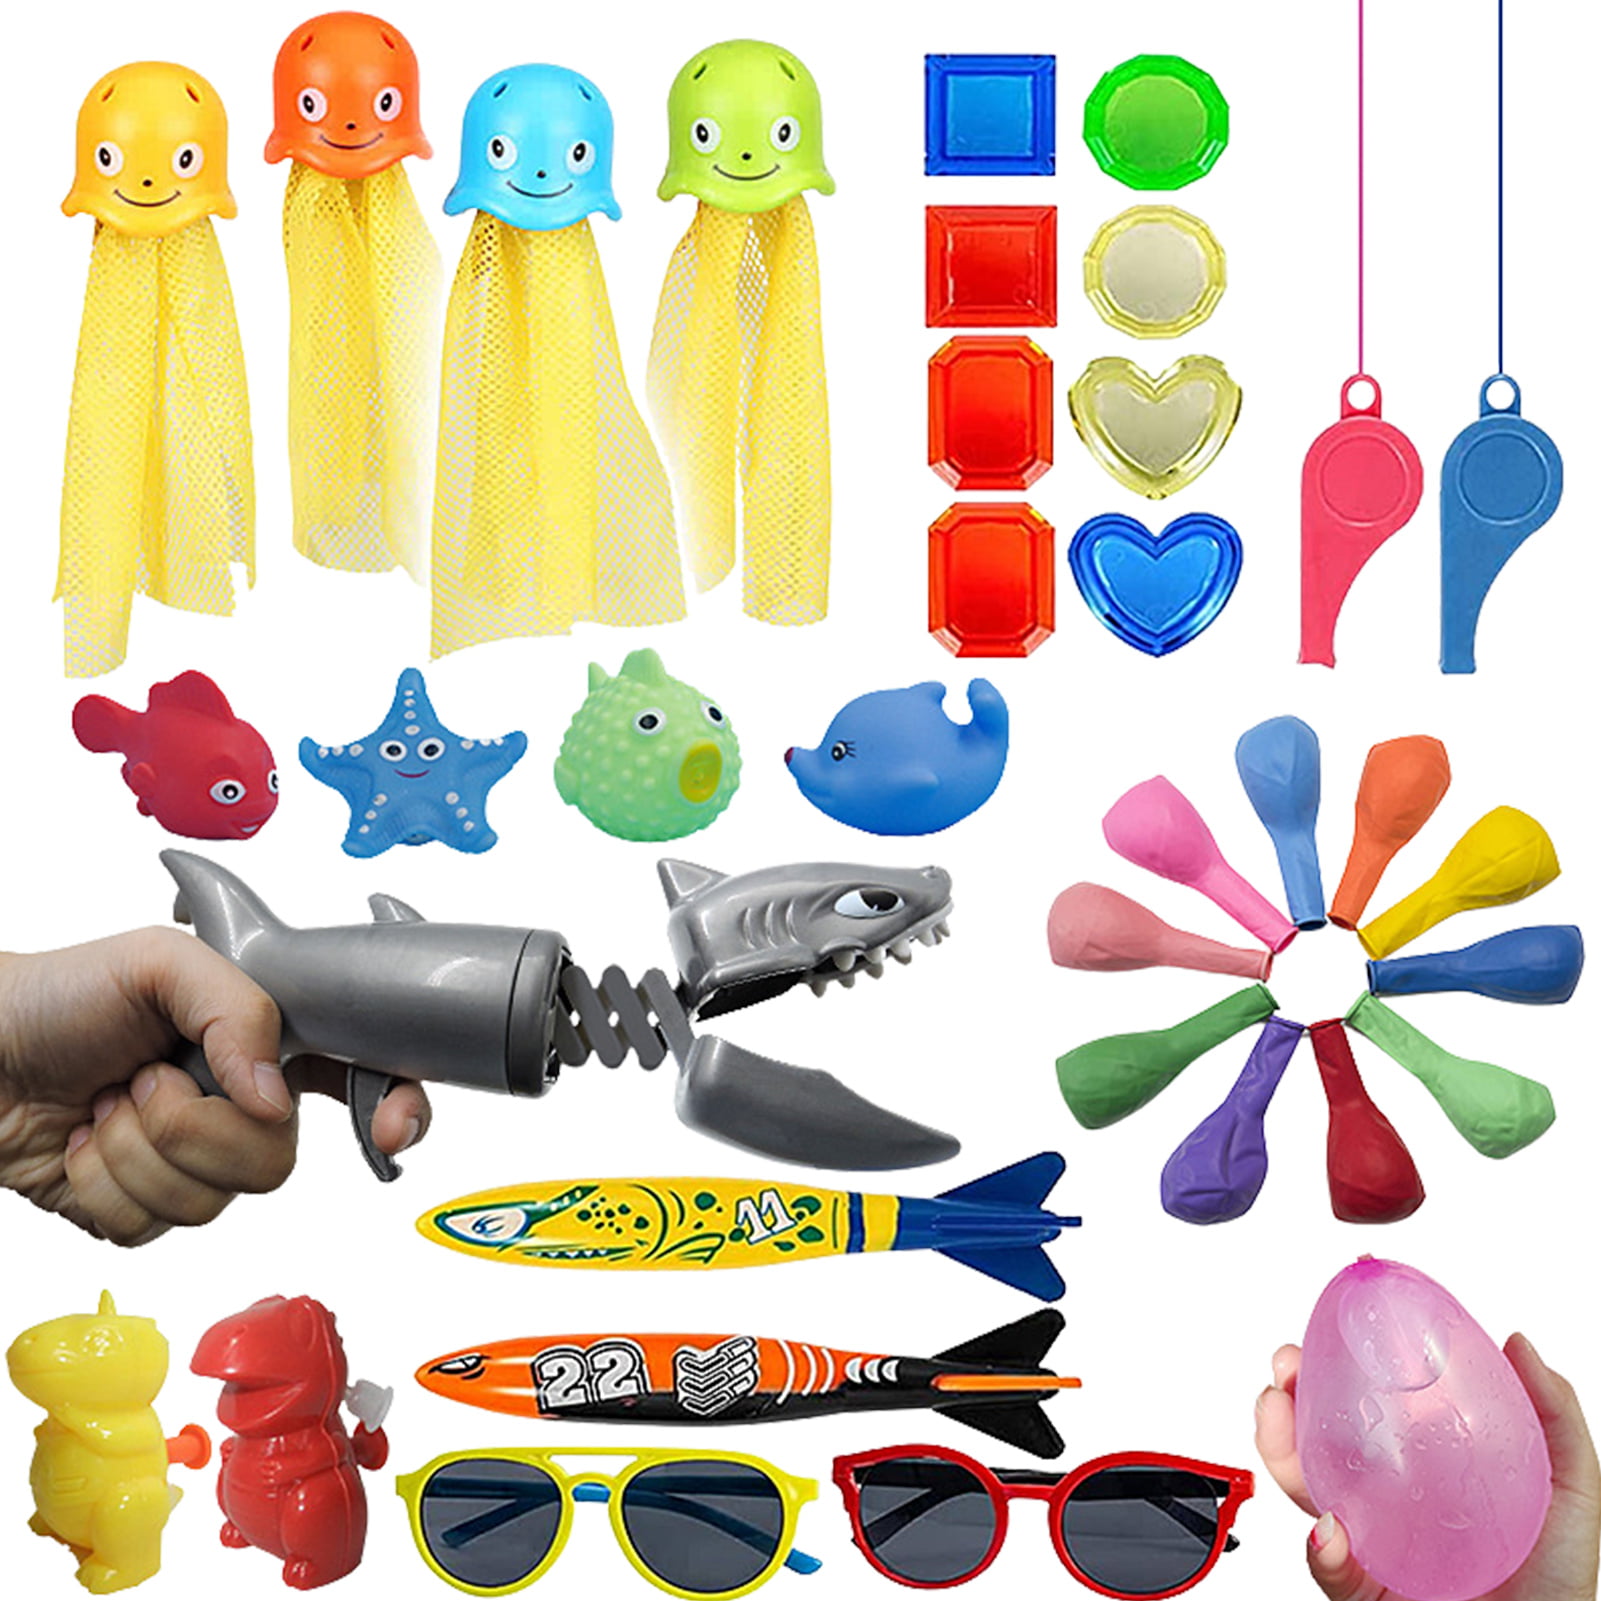 19PCS Underwater Swimming Diving Pool Toys 4 Dive Rings Summer Under Water Pool Training Toys Treasures Gift Set Bundle 3 Stringy Octopu 8 Jewel Gem Treasure Weighted Dive Toy 4 Toypedo Bandits 